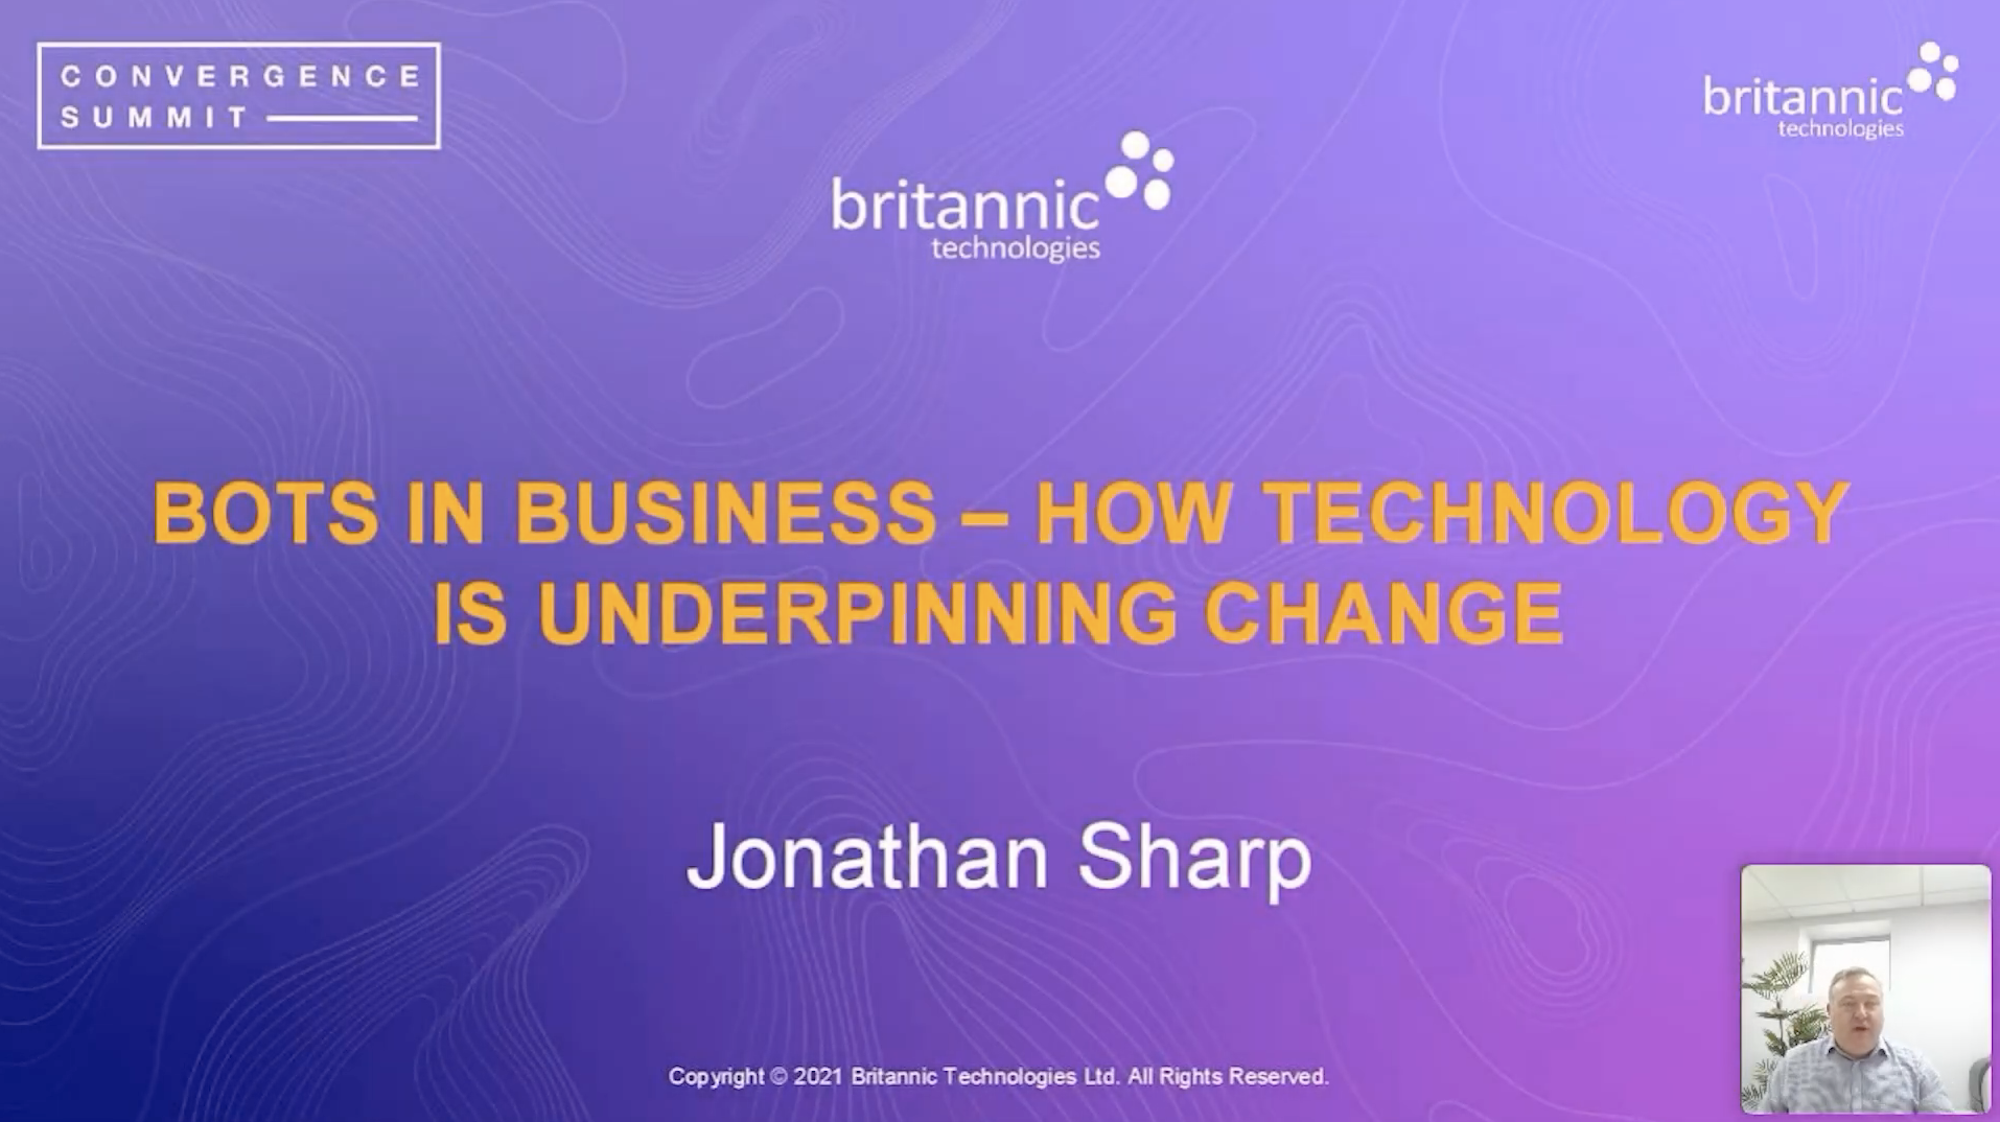 Jonathan Sharp |  Bots in Business: How Technology is Underpinning Change